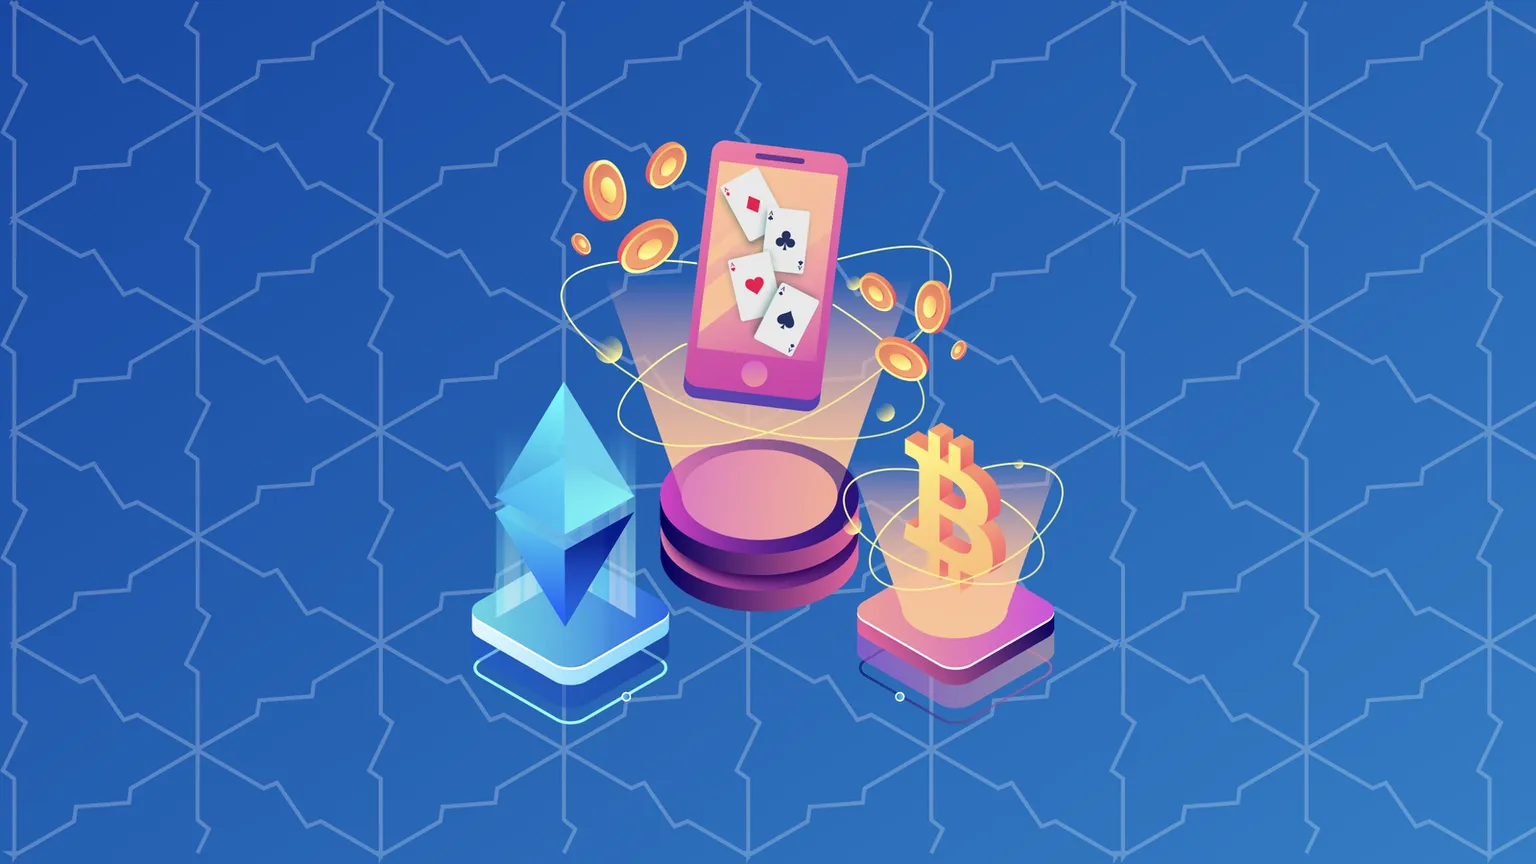 Bling Financial makes mobile games with crypto rewards. Image: Decrypt